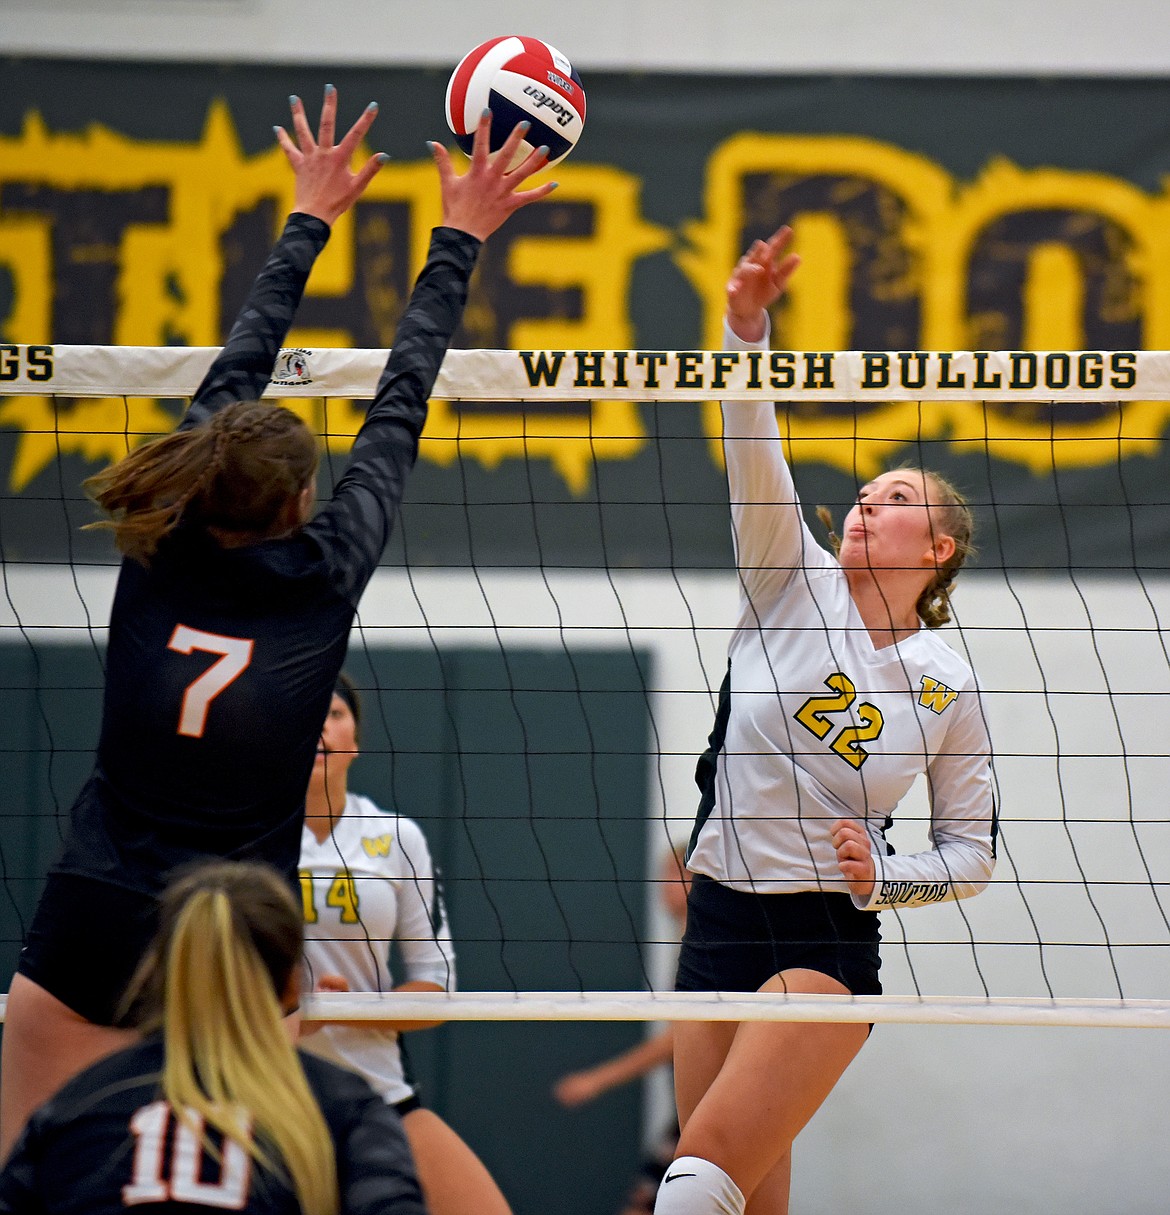 Lady Bulldog sophomore Brooke Zetooney hits the ball over the net in a match against Frenchtown in Whitefish on Thursday. (Whitney England/Whitefish Pilot)